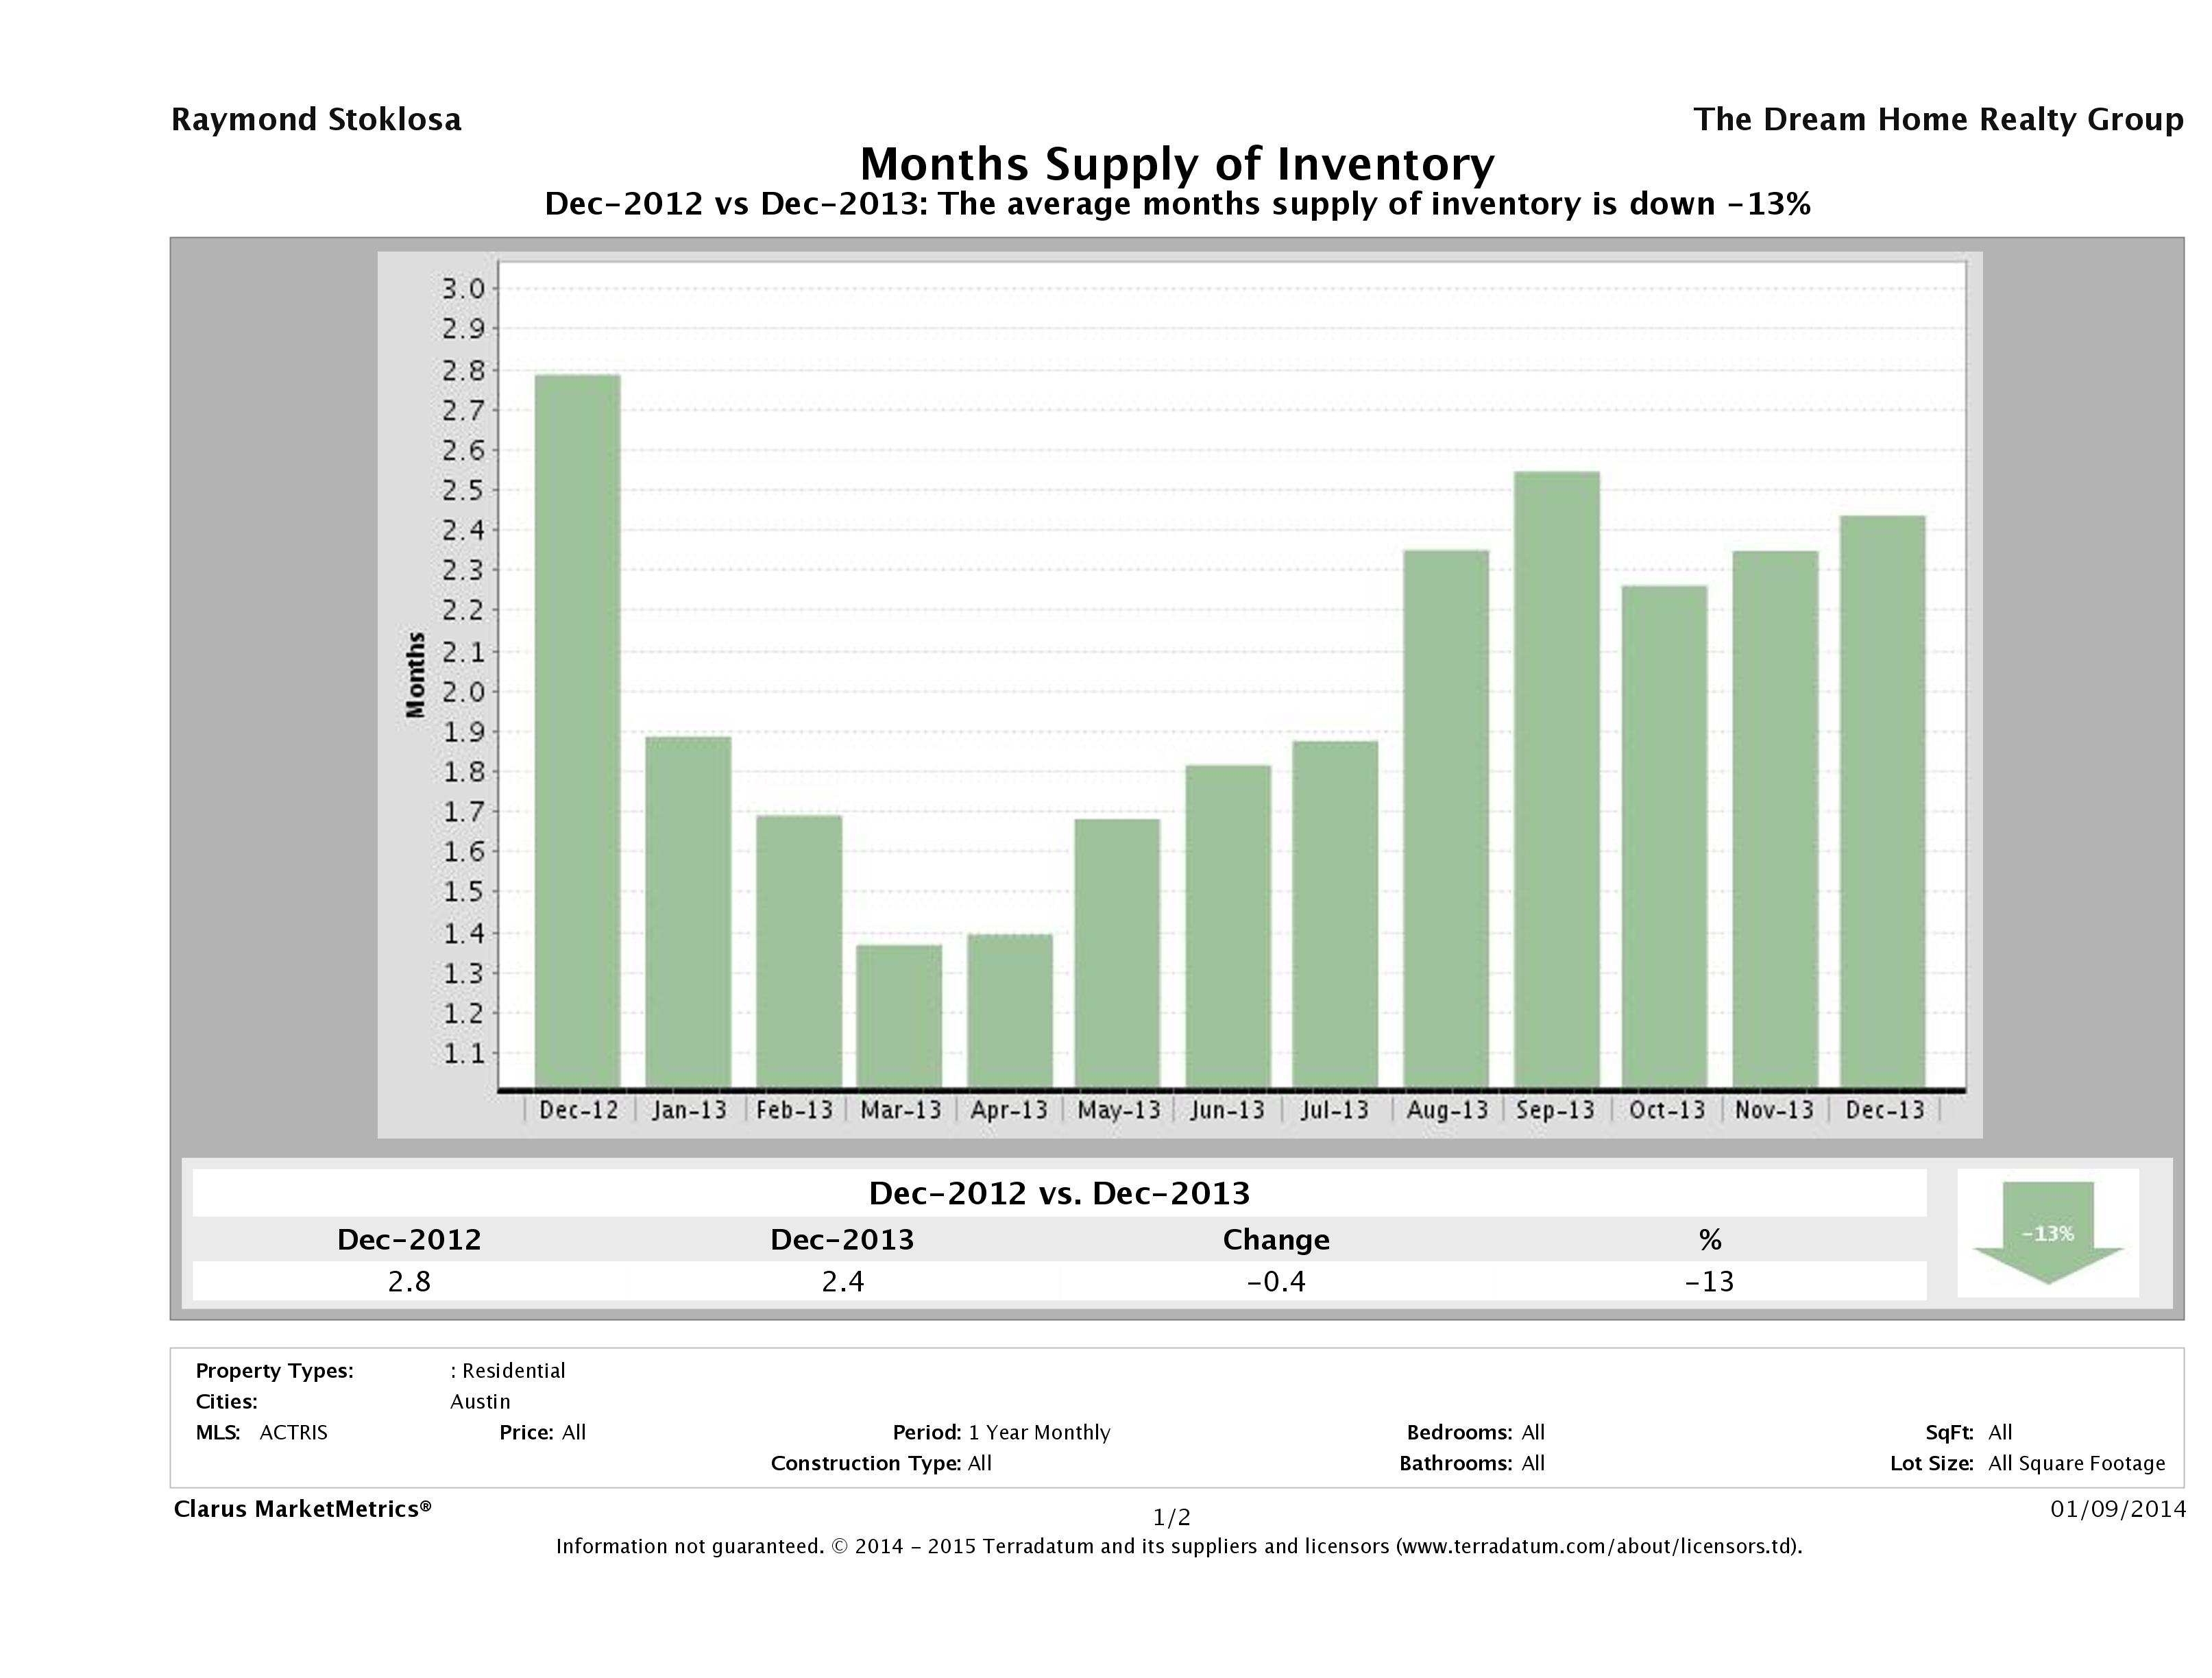 Austin single family home months inventory December 2013